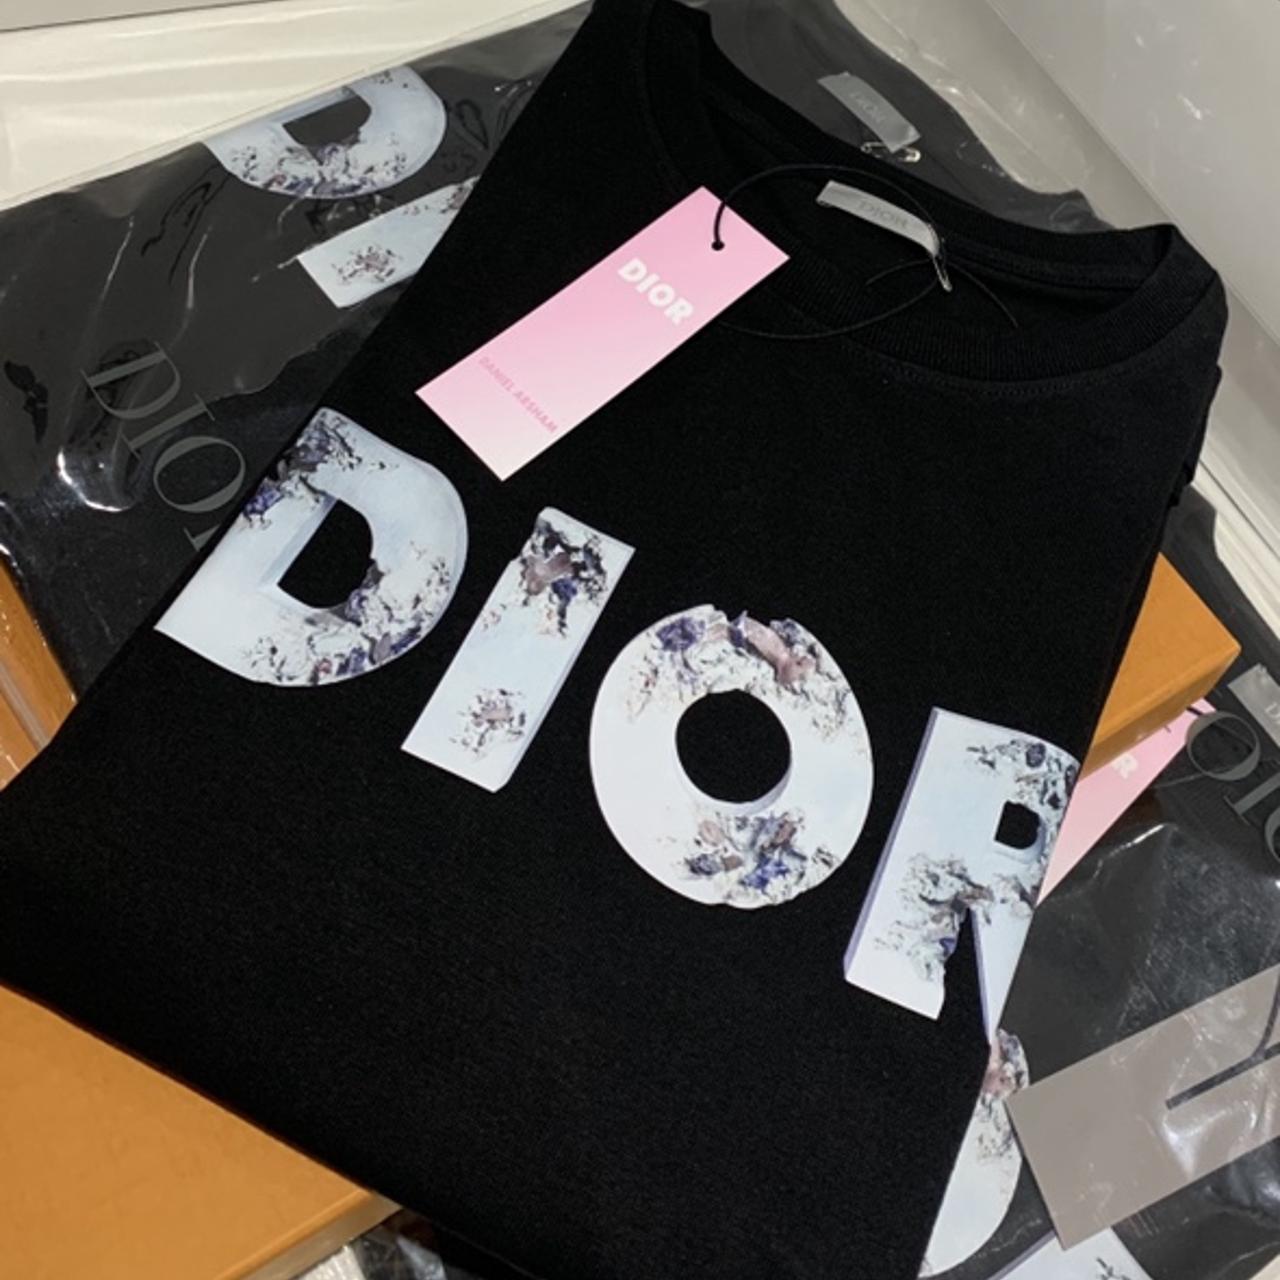 Blackwhite skinny cotton Tshirt withCD and basketball 3D prints  corroded by Dior and Daniel Arsham For Mans Tshirt For Womans Tshirt  White XL Buy Online at Best Price in UAE  Amazonae